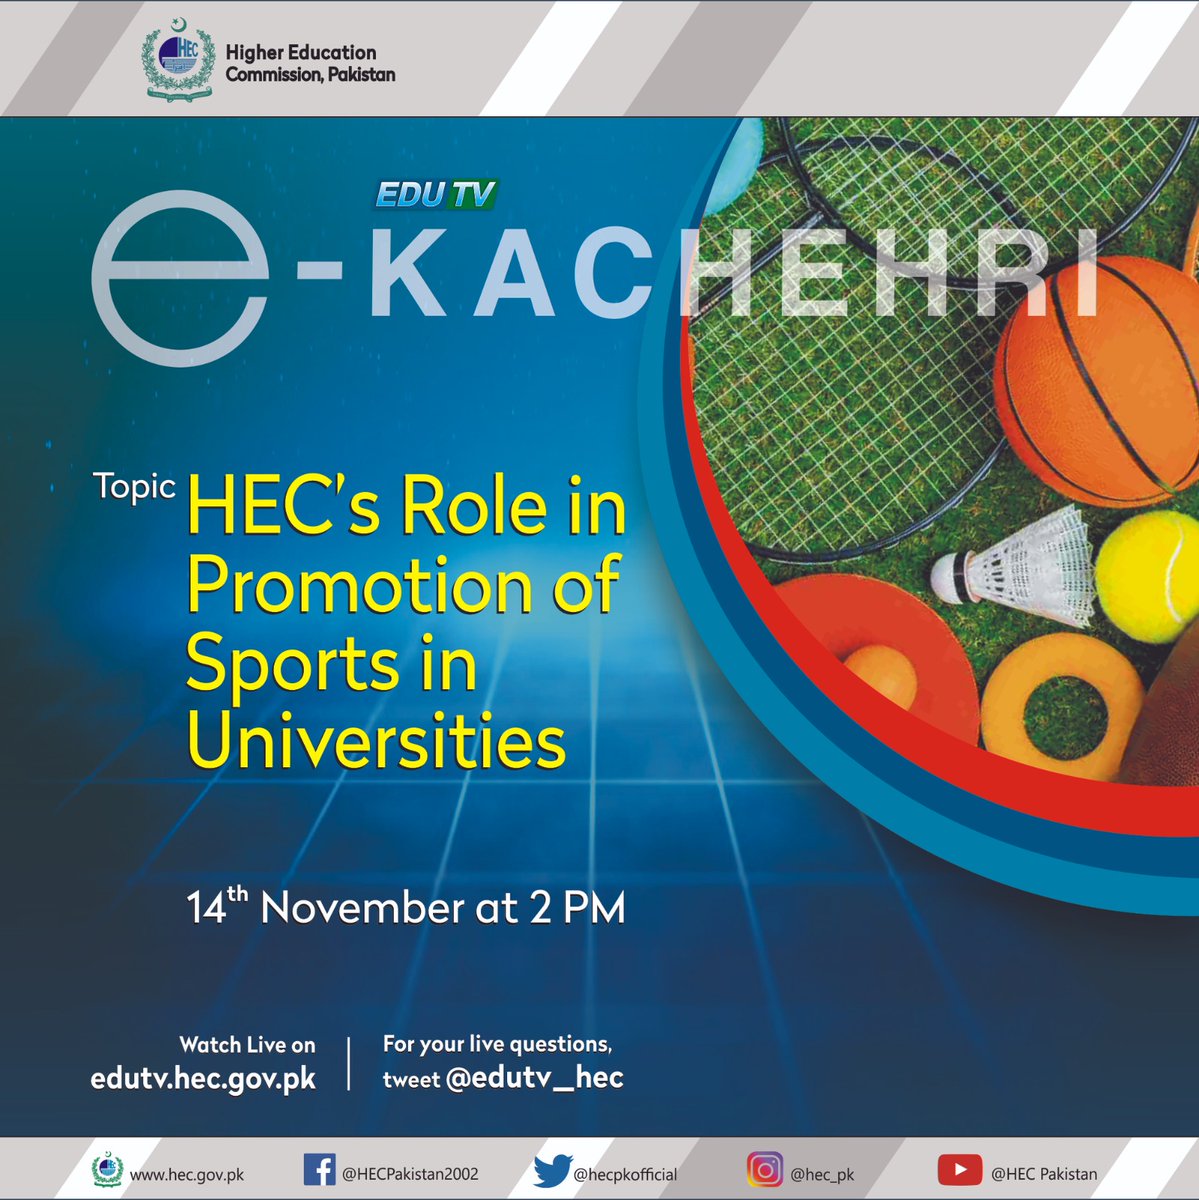 Send your questions by posting on X and mentioning @edutv_hec

You can also watch the programme live on EduTV's YouTube channel: 'Higher Education TV Channel'

#HEC #Education #UniversitySports